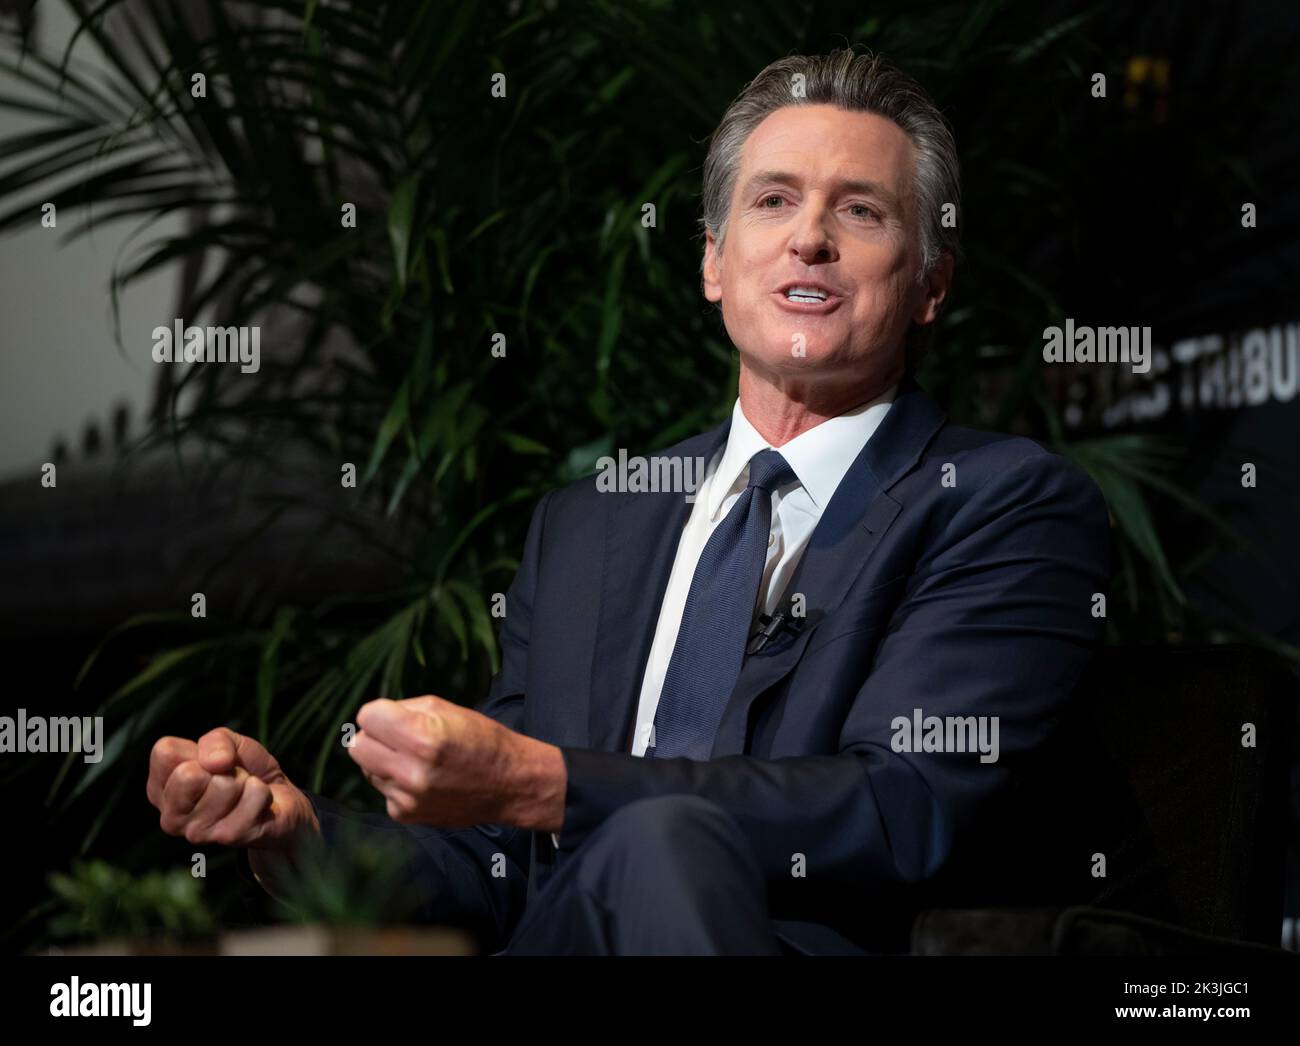 Austin Texas USA, September 24, 2022: California Democratic governor GAVIN NEWSOM speaks about the state of U.S. politics during an interview session at the annual Texas Tribune Festival in downtown Austin. Newsom, a former mayor of San Francisco, is mentioned as a possible 2024 U.S. presidential candidate. Stock Photo